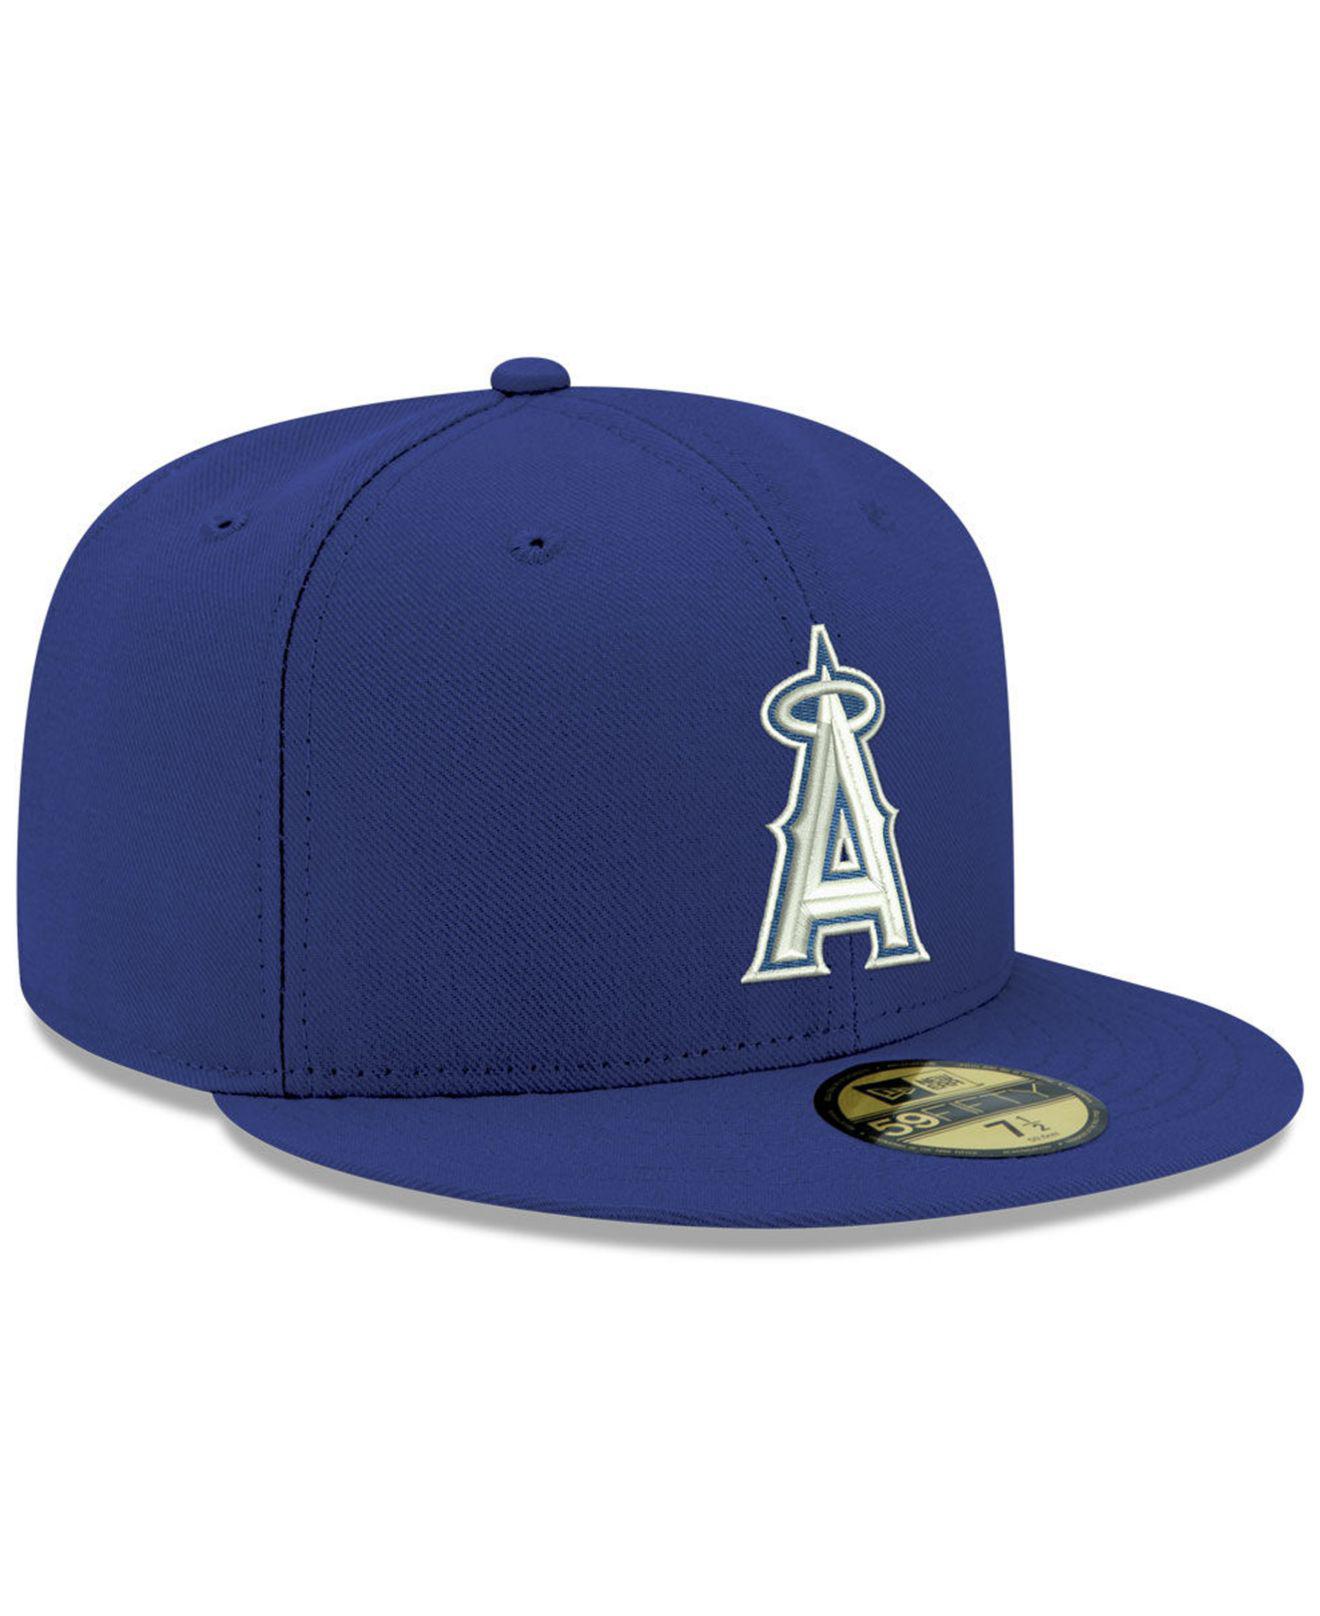 Men's New Era Los Angeles Dodgers Black on DUB 59FIFTY Fitted Hat